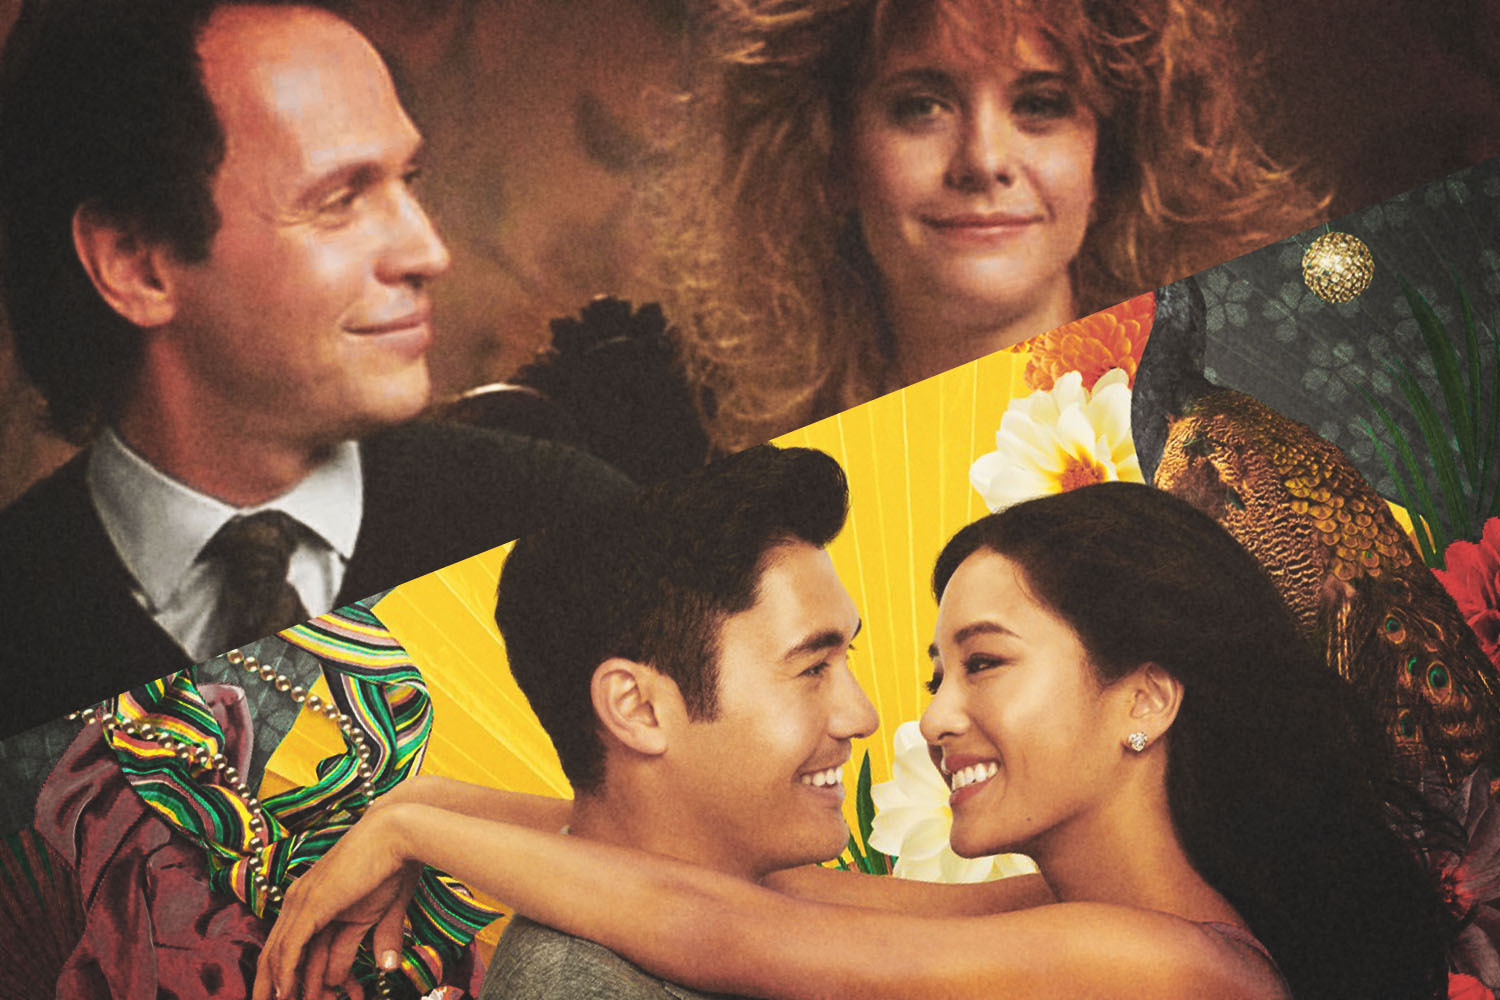 Screenshots of "When Harry Met Sally" and "Crazy Rich Asians," two iconic rom-coms from the last 30 years